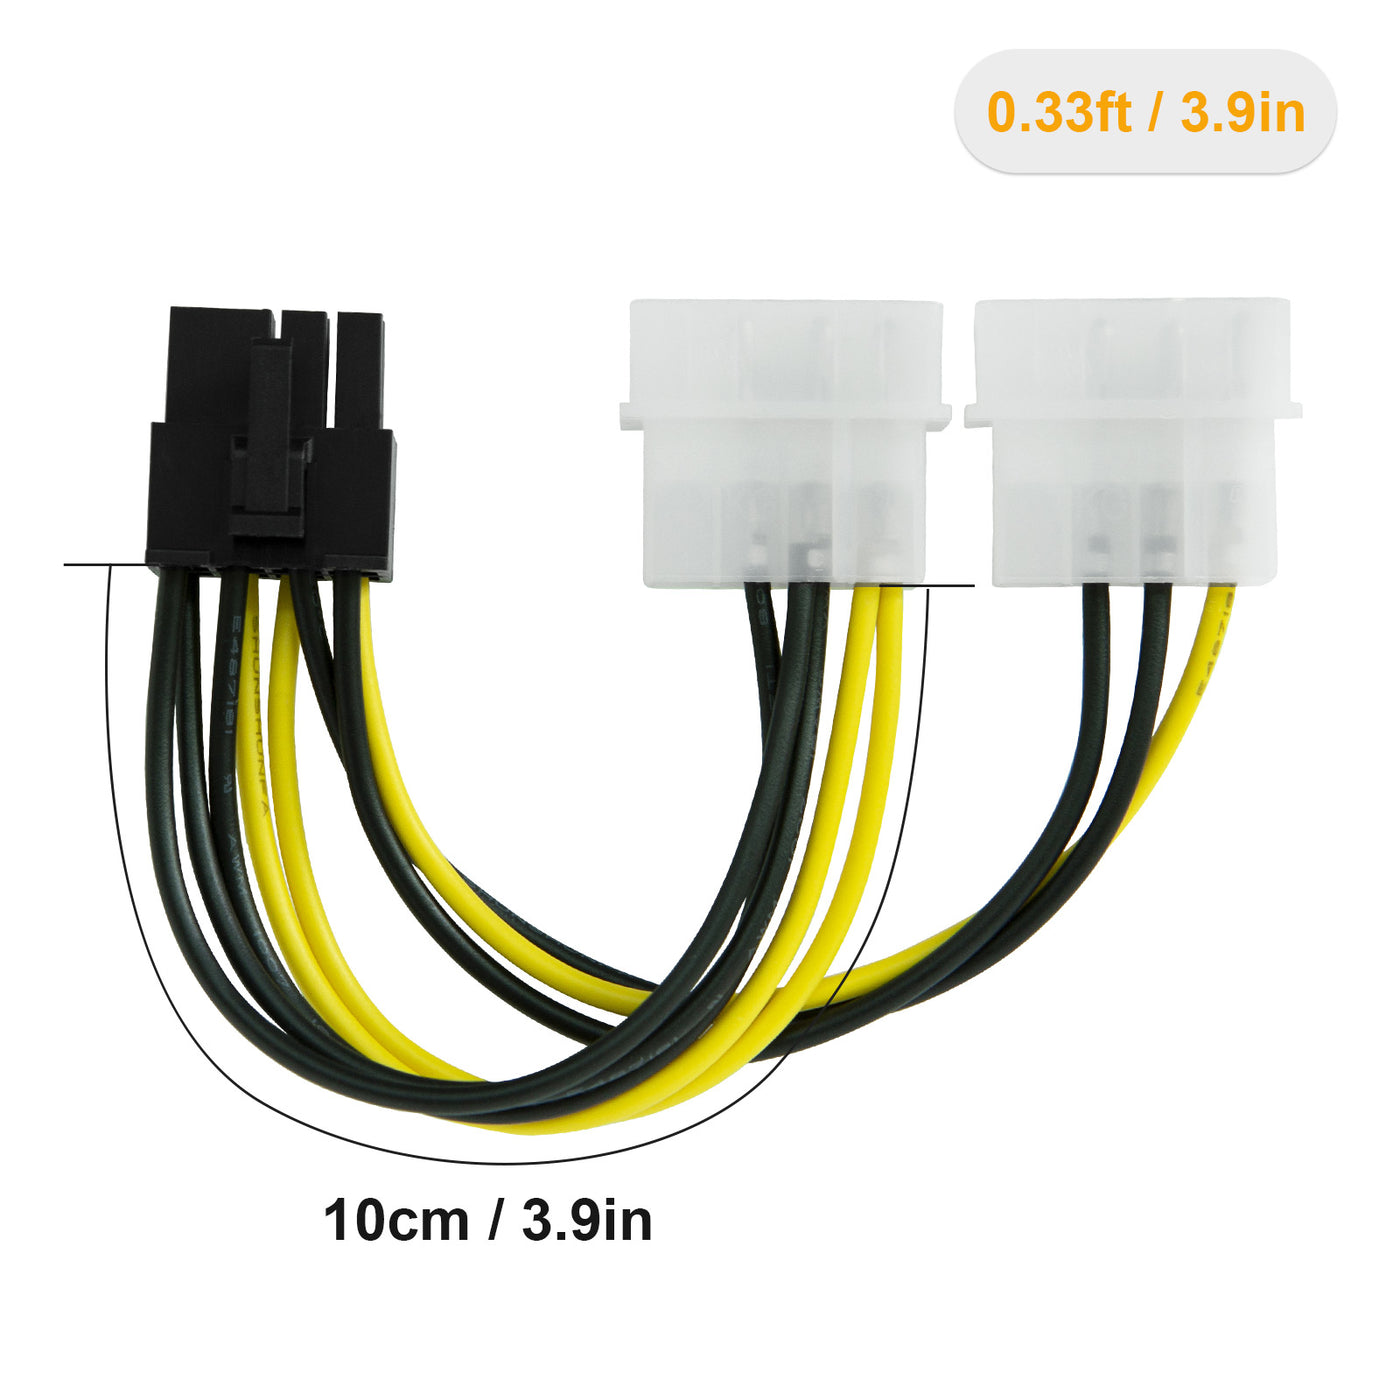 2-Pack Molex to PCIe Power Cable